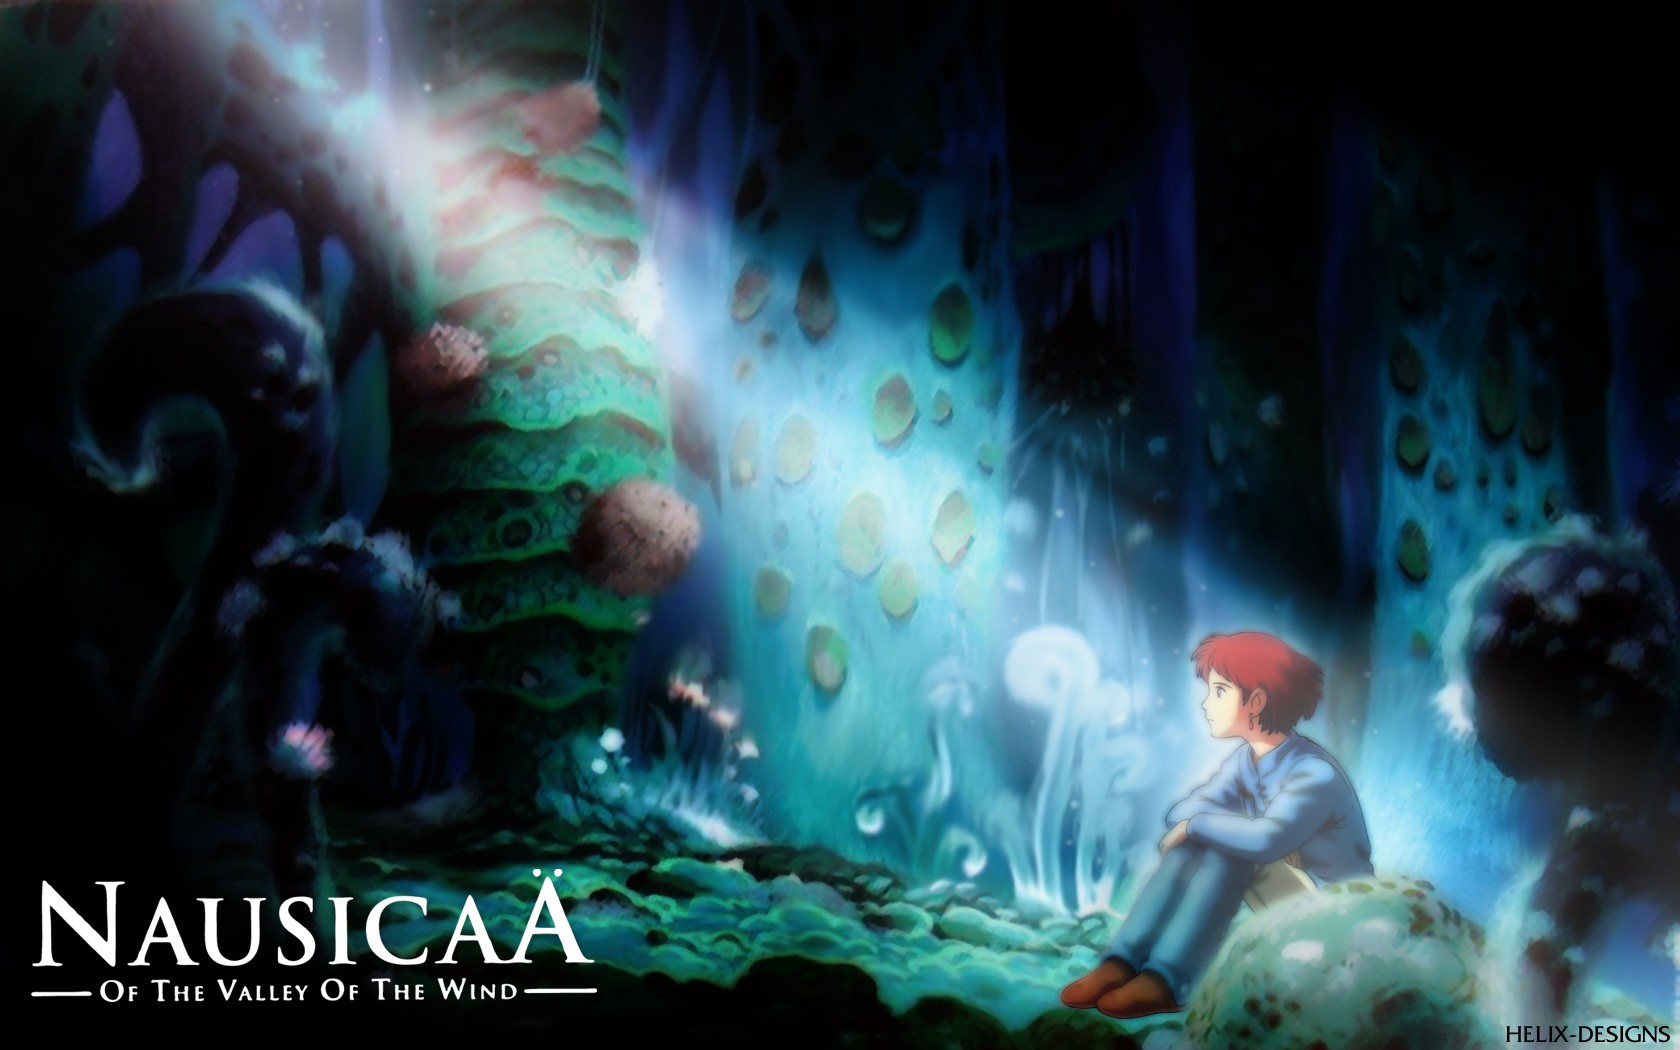 Anime 1680x1050 Nausicaa of the Valley of the Wind text anime watermarked